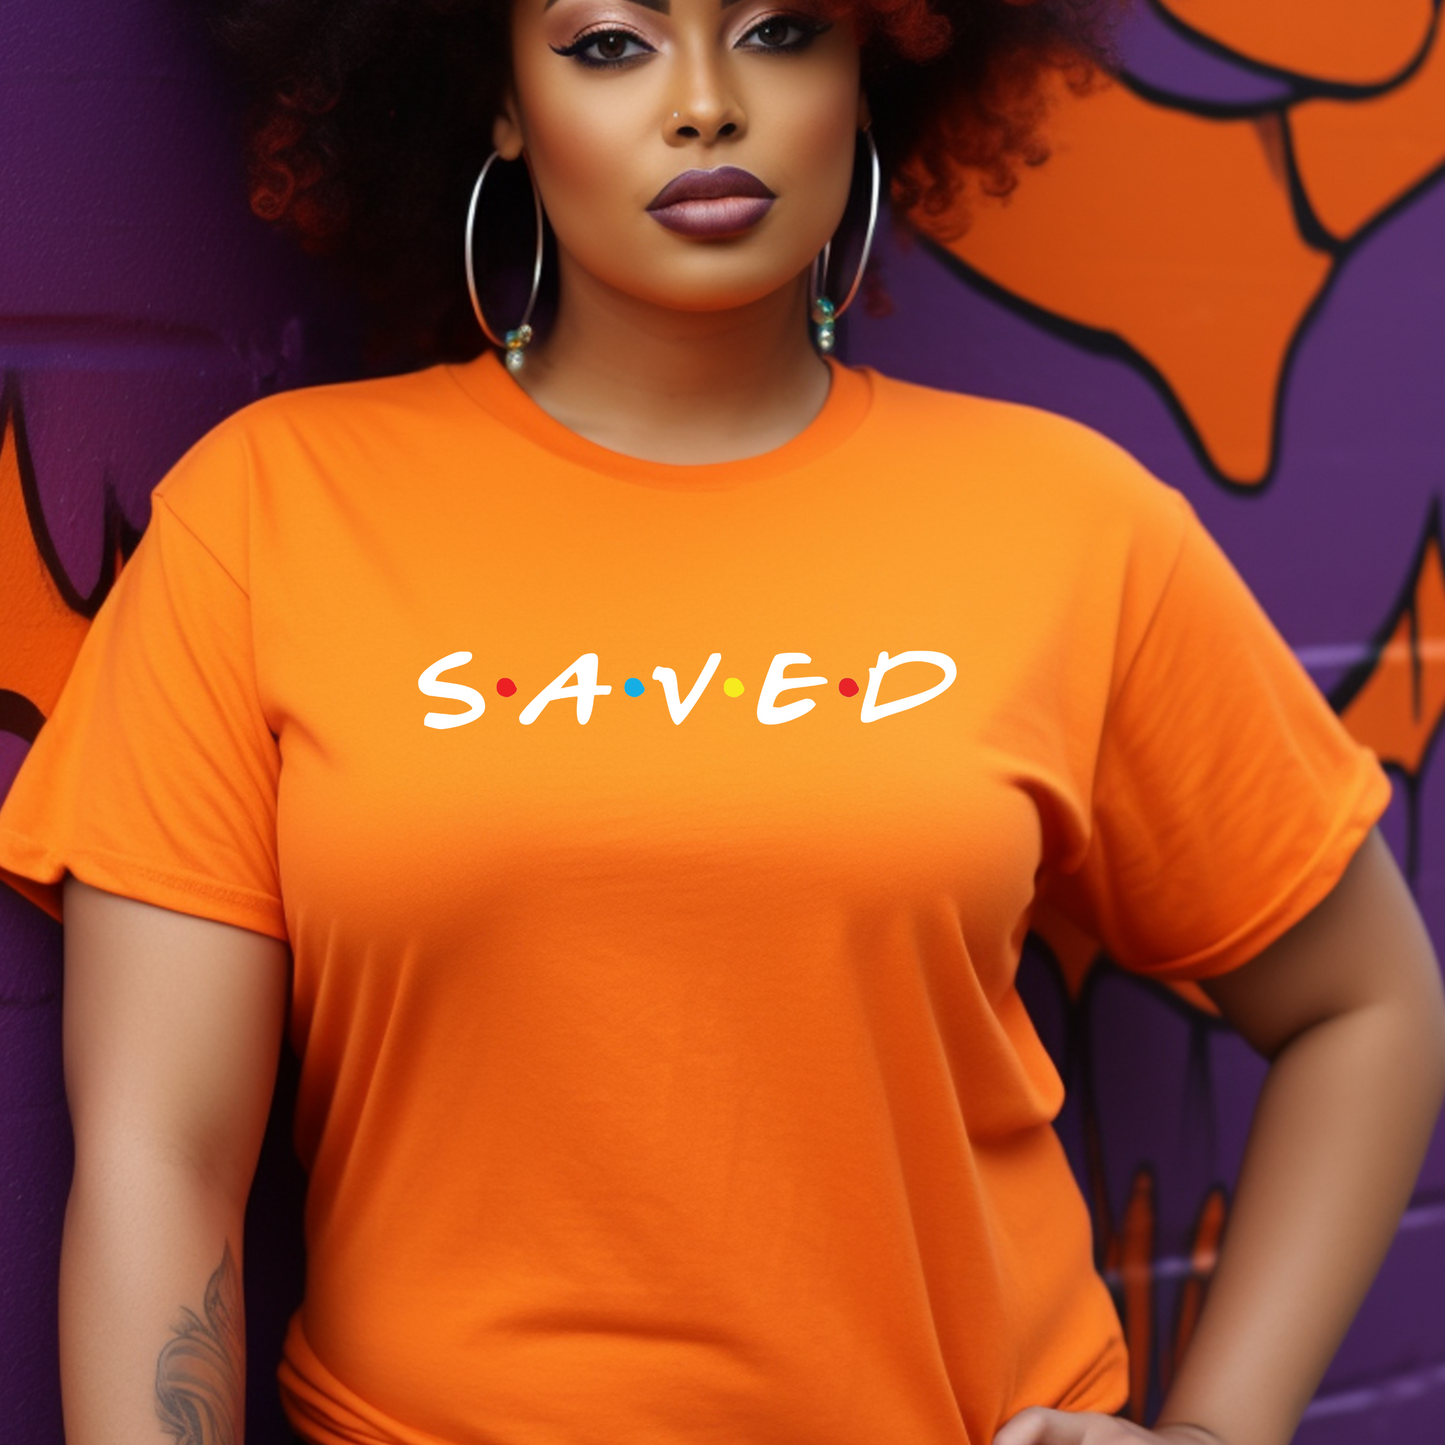 Eye-catching orange 'Saved' t-shirt at Triumph Tees, symbolizing salvation in faith. This God-themed apparel is a trendy way to express religious beliefs.